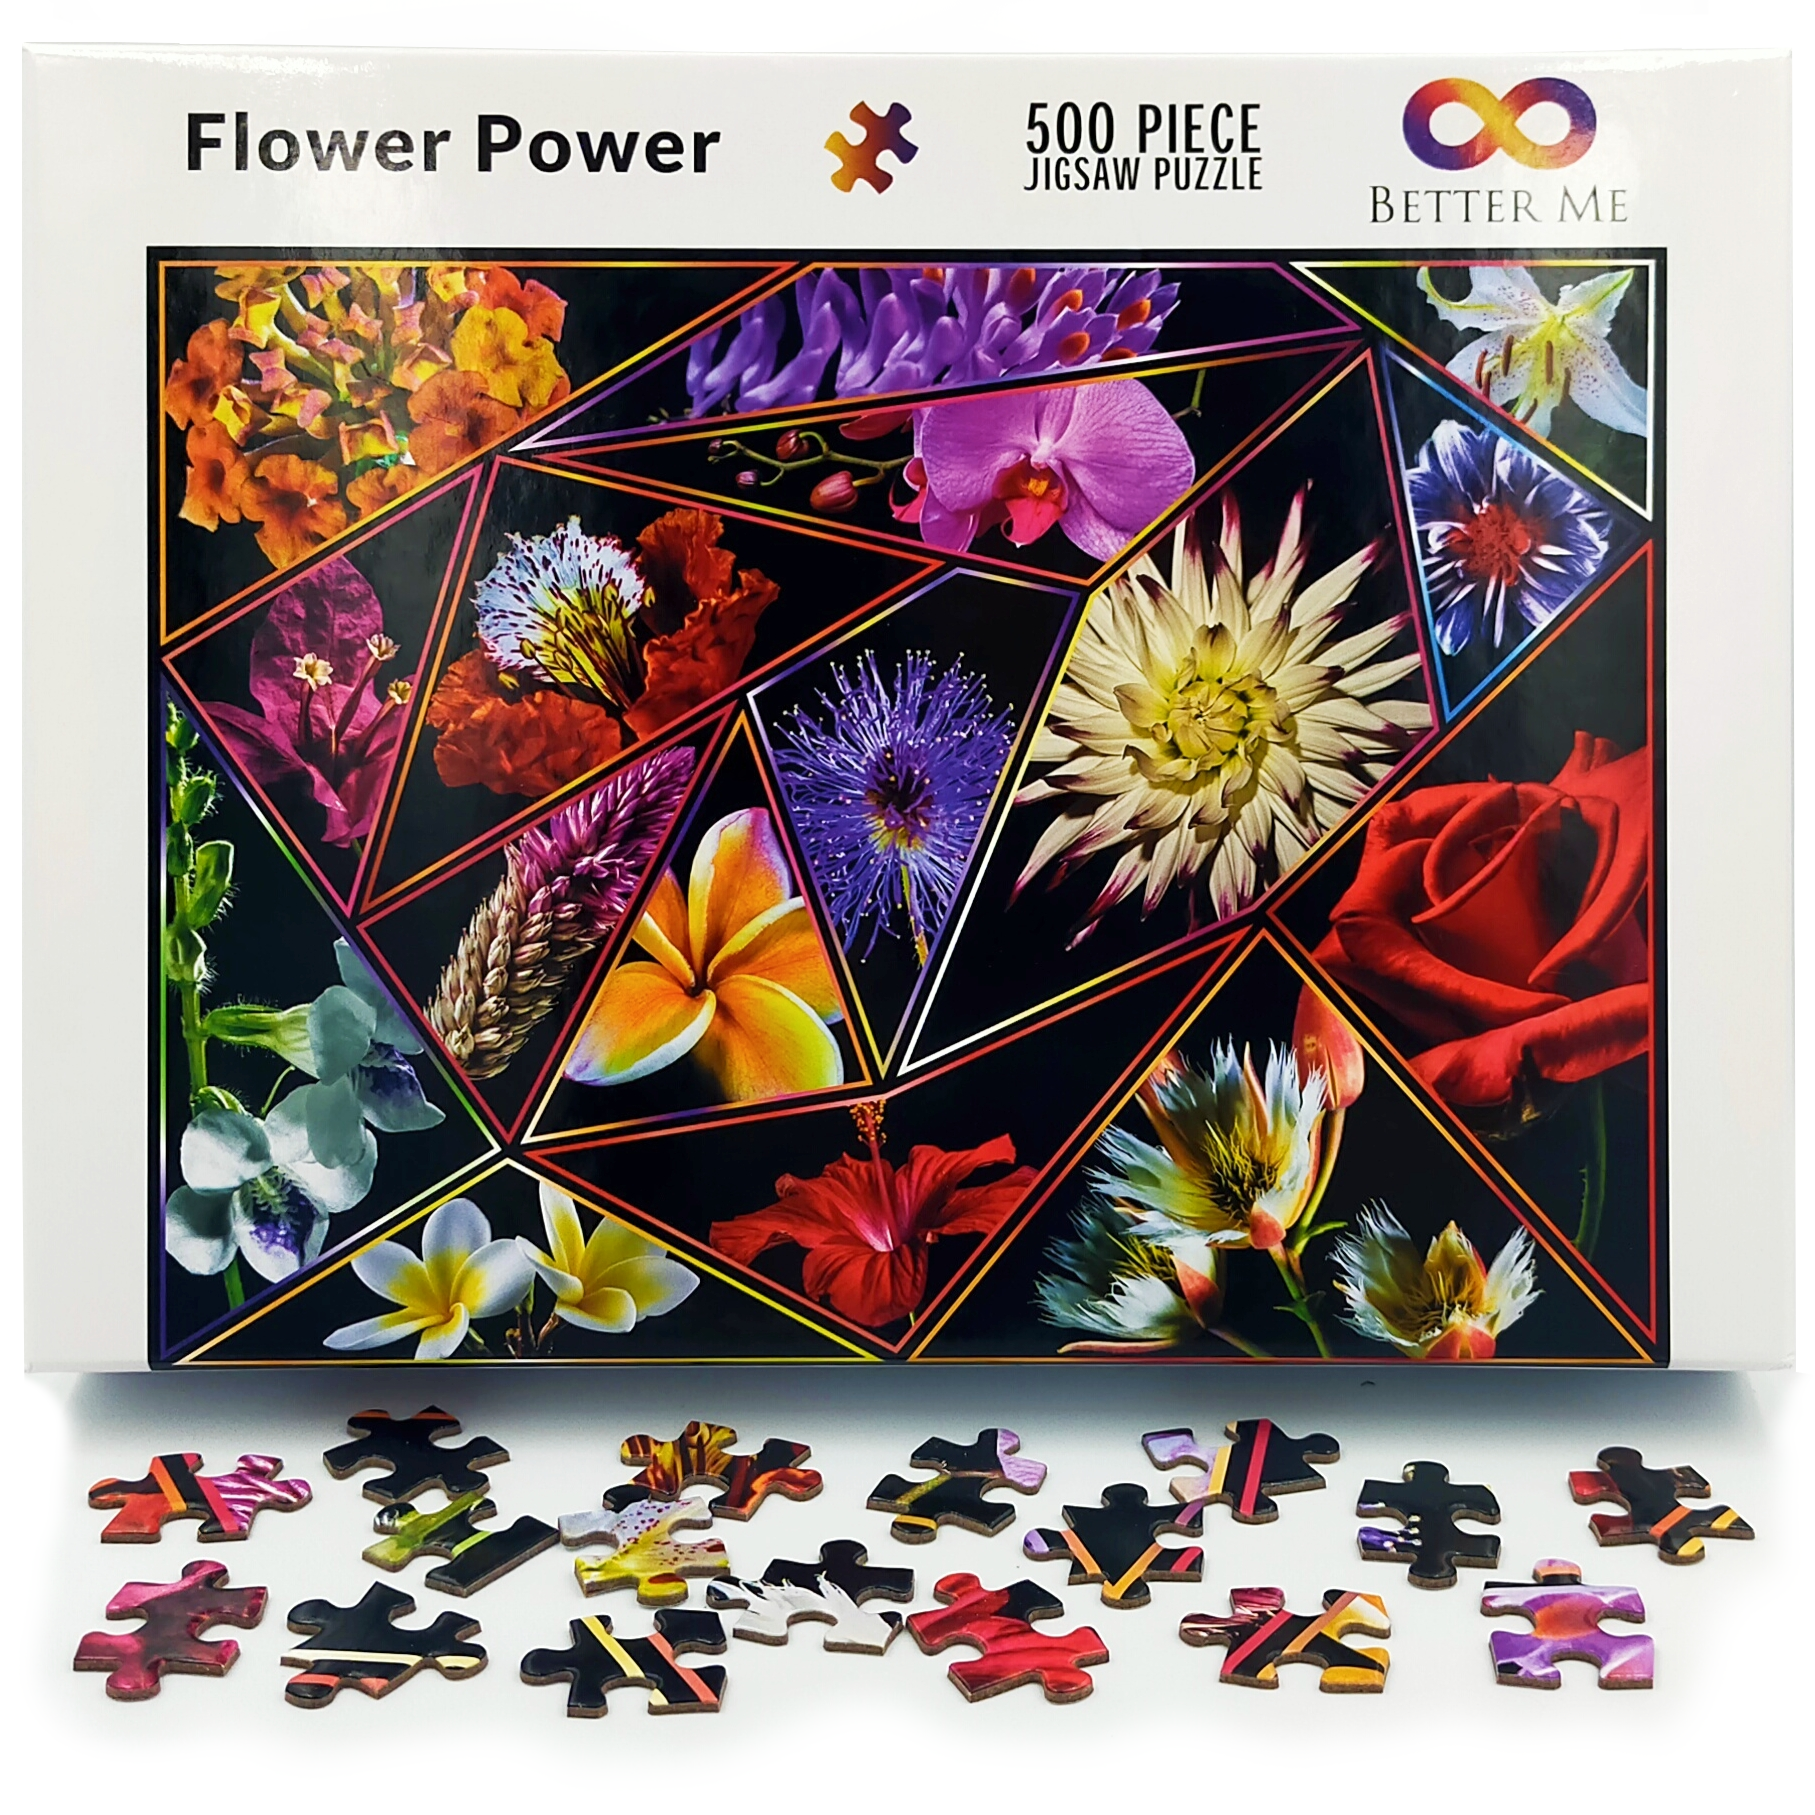 Flowers, Adult Puzzles, Jigsaw Puzzles, Products